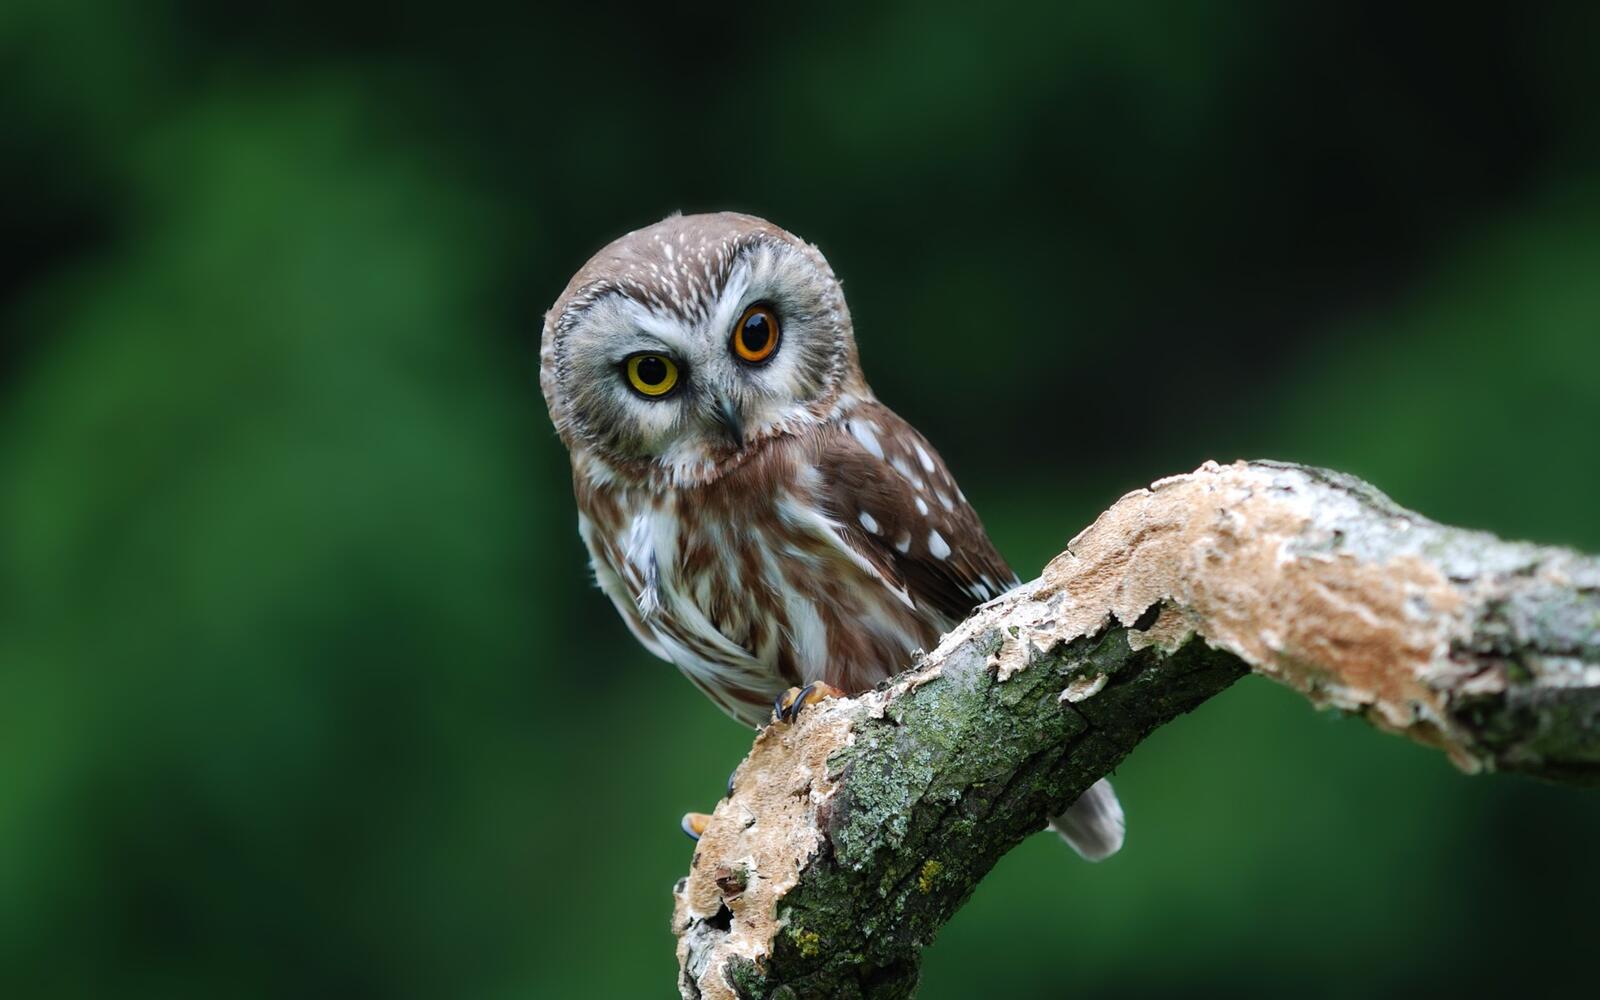 Free photo A curious little owl with colored eyes sits in a tree